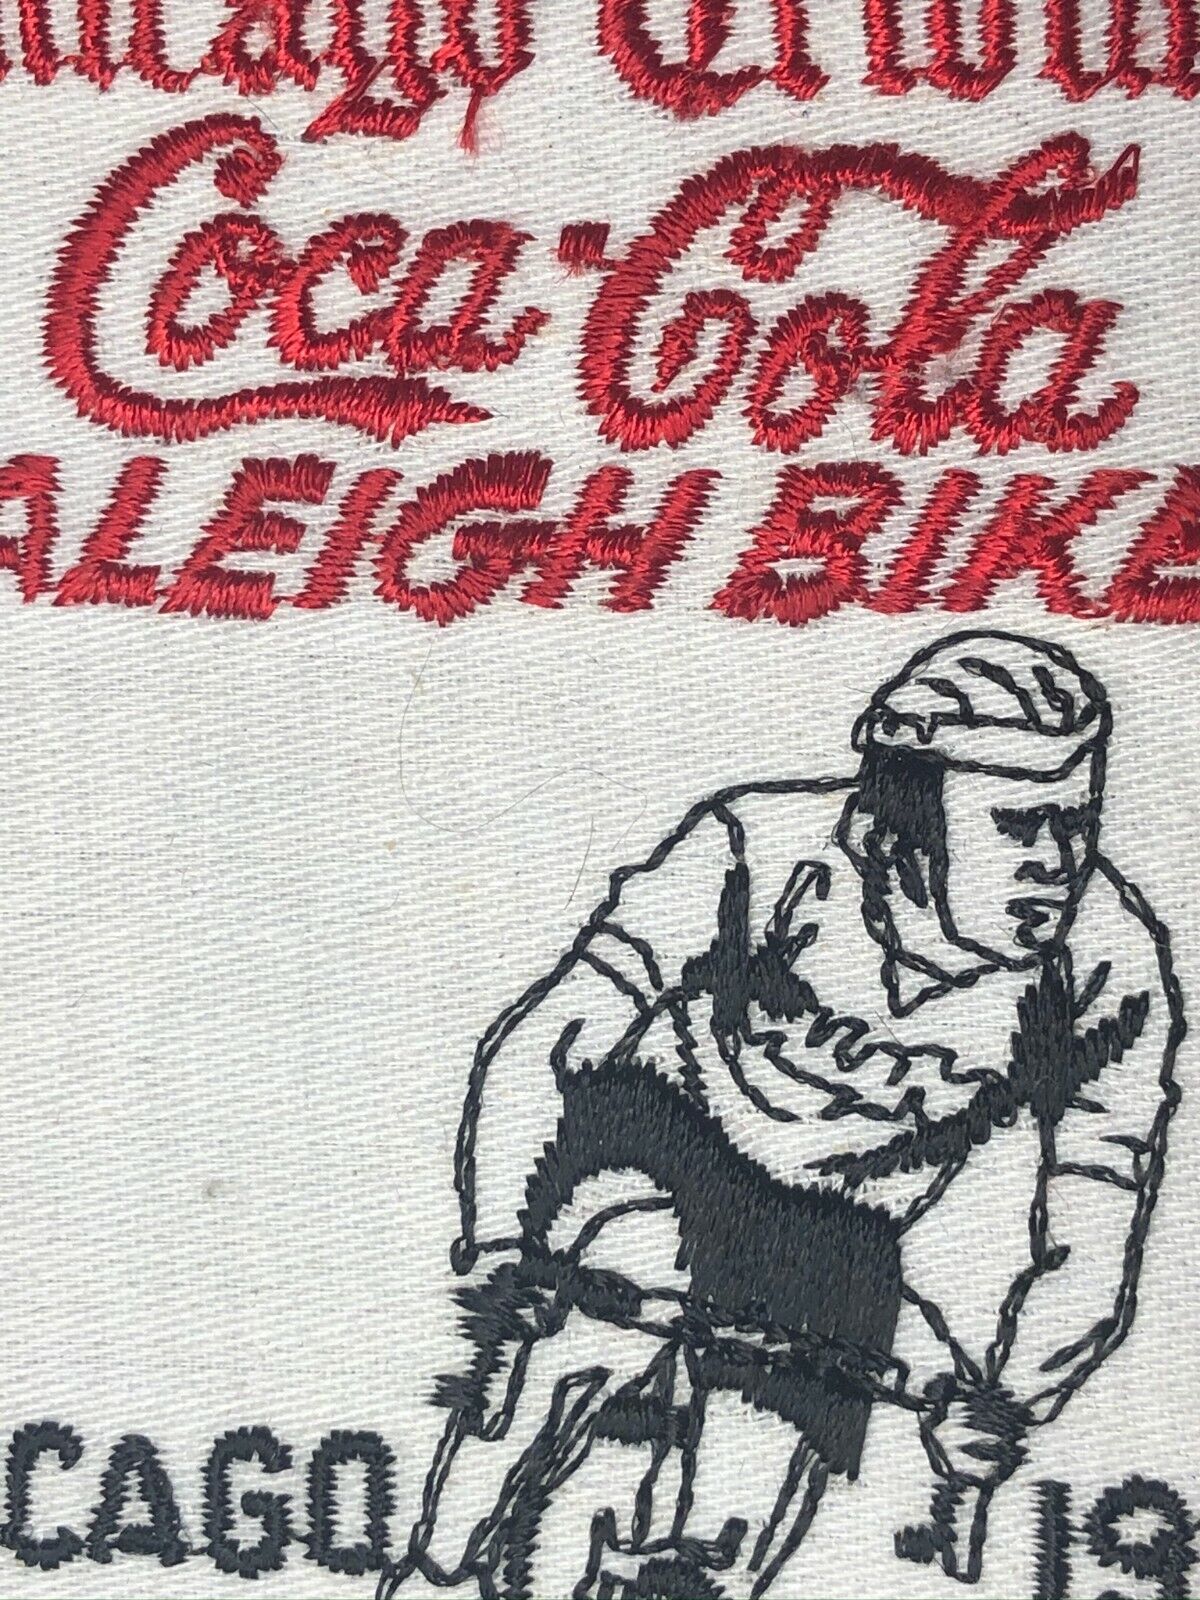 Vintage NOS Machine Stitched Embroidered Patch Coca-Cola Chicago 76\' Bike Rally